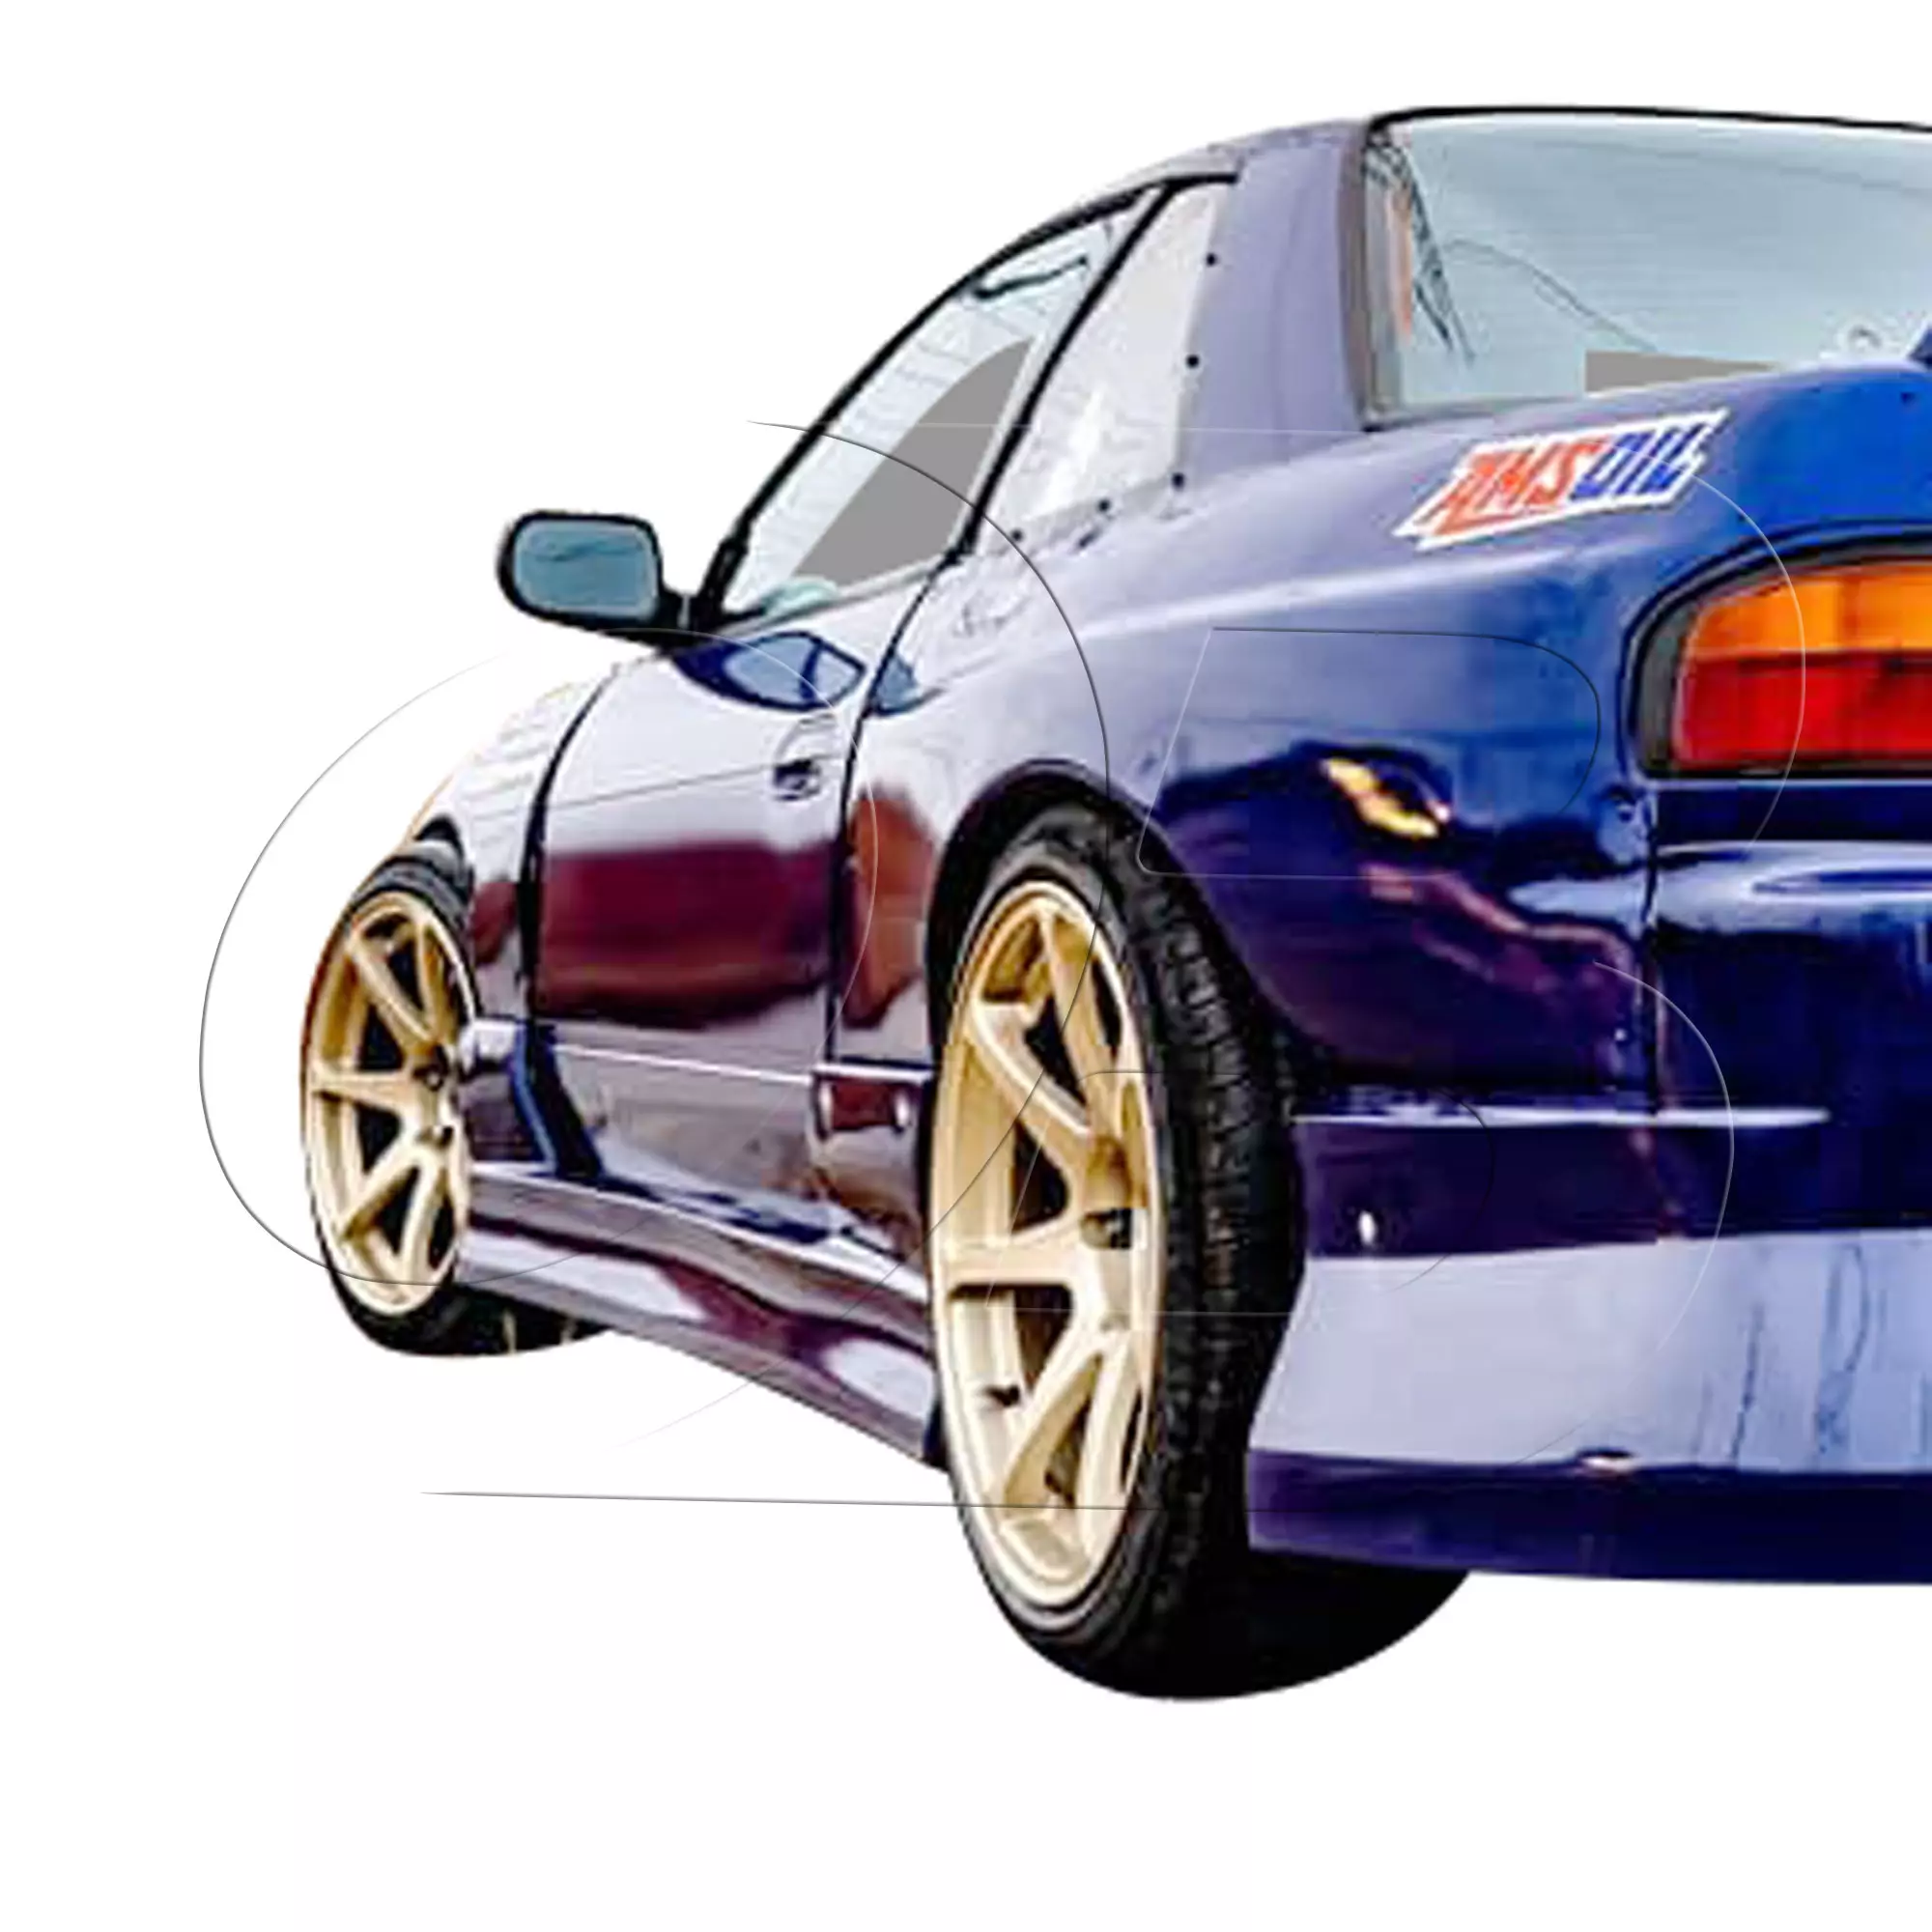 KBD Urethane Bsport2 Style 4pc Full Body Kit > Nissan 240SX 1989-1994 > 2dr Coupe - Image 54